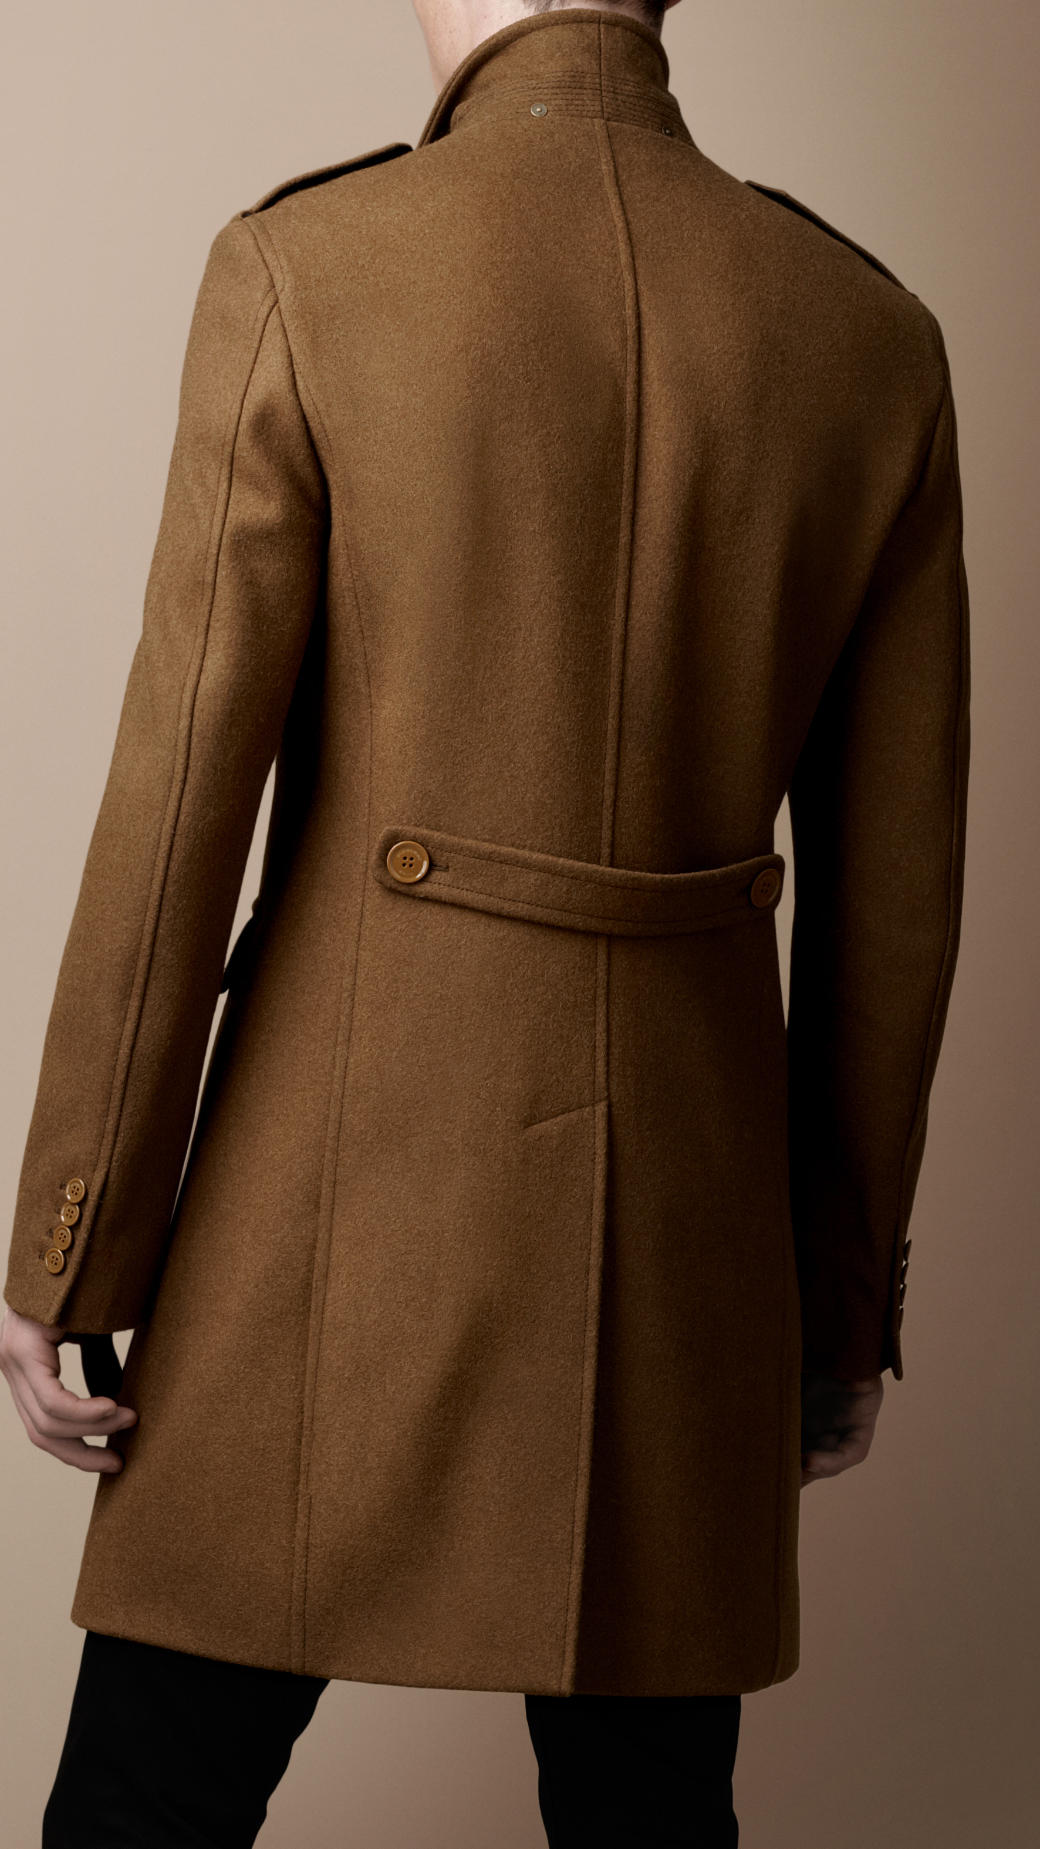 Lyst - Burberry brit Wool Blend Chesterfield Coat in Brown for Men